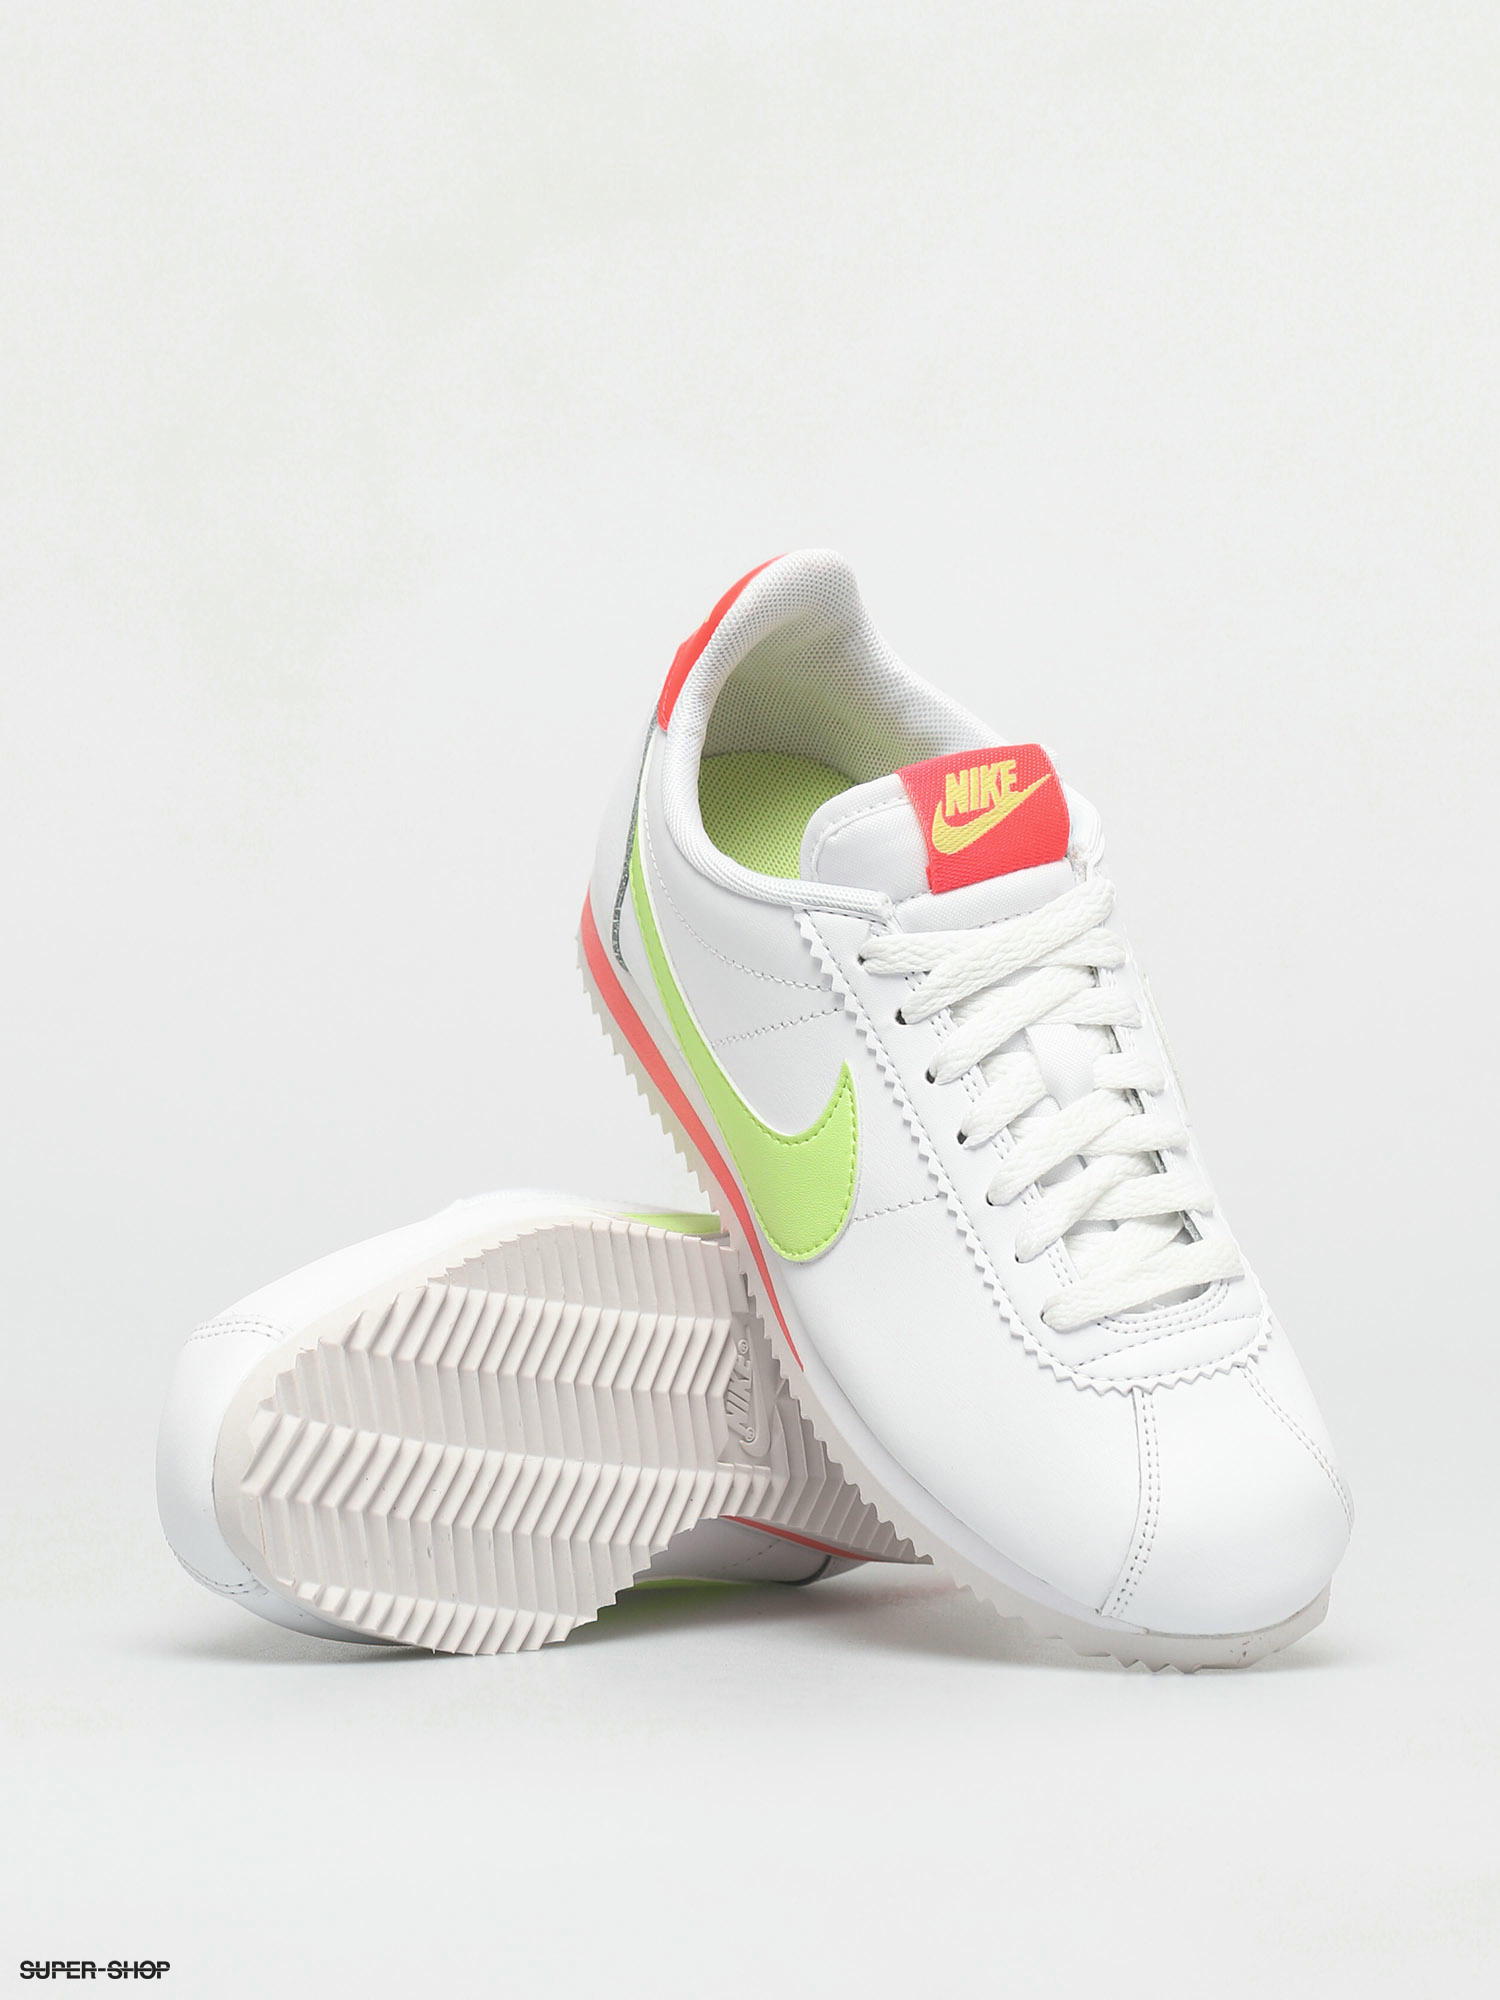 LOW PRICE NIKE CLASSIC CORTEZ BASIC LEATHER CUSTOMIZE COLOR 807471